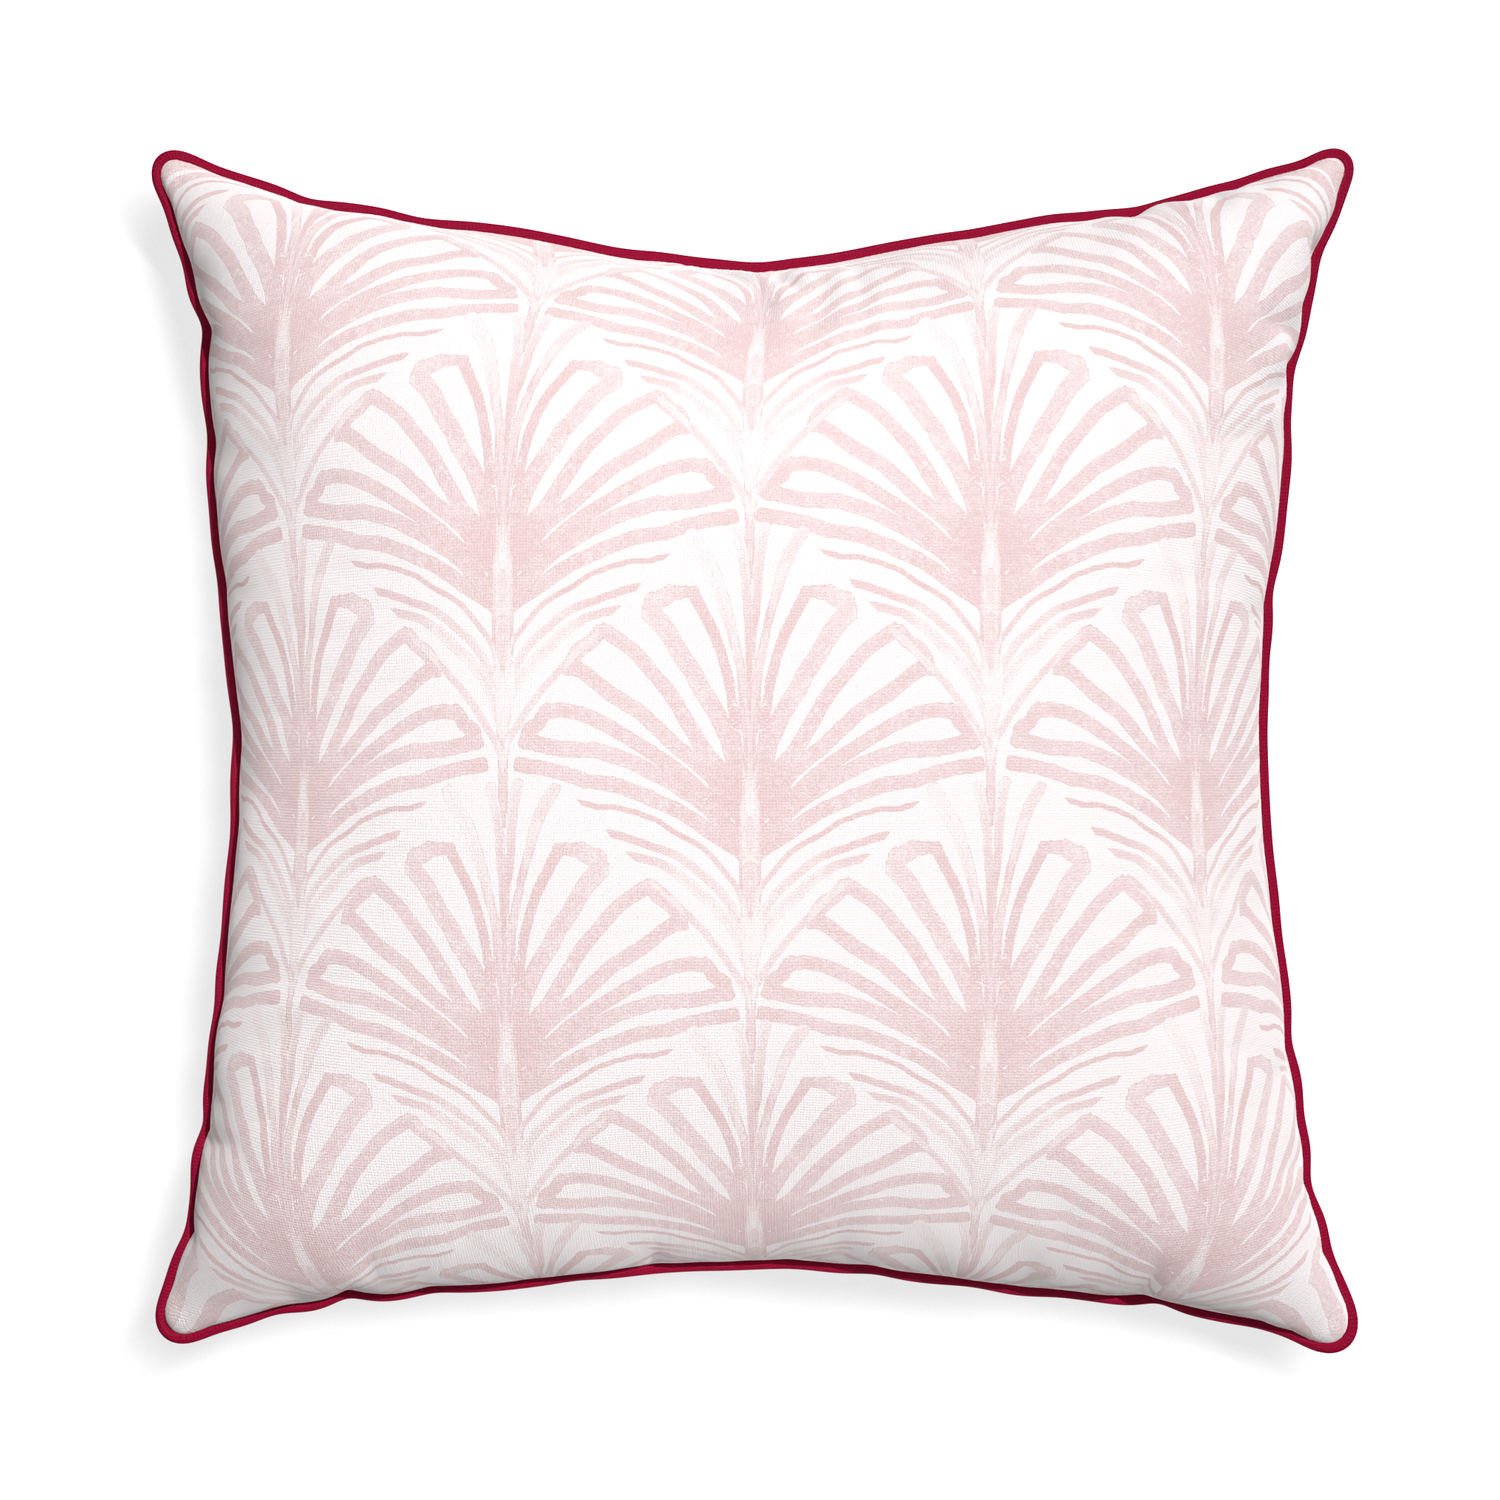 Euro-sham suzy rose custom pillow with raspberry piping on white background